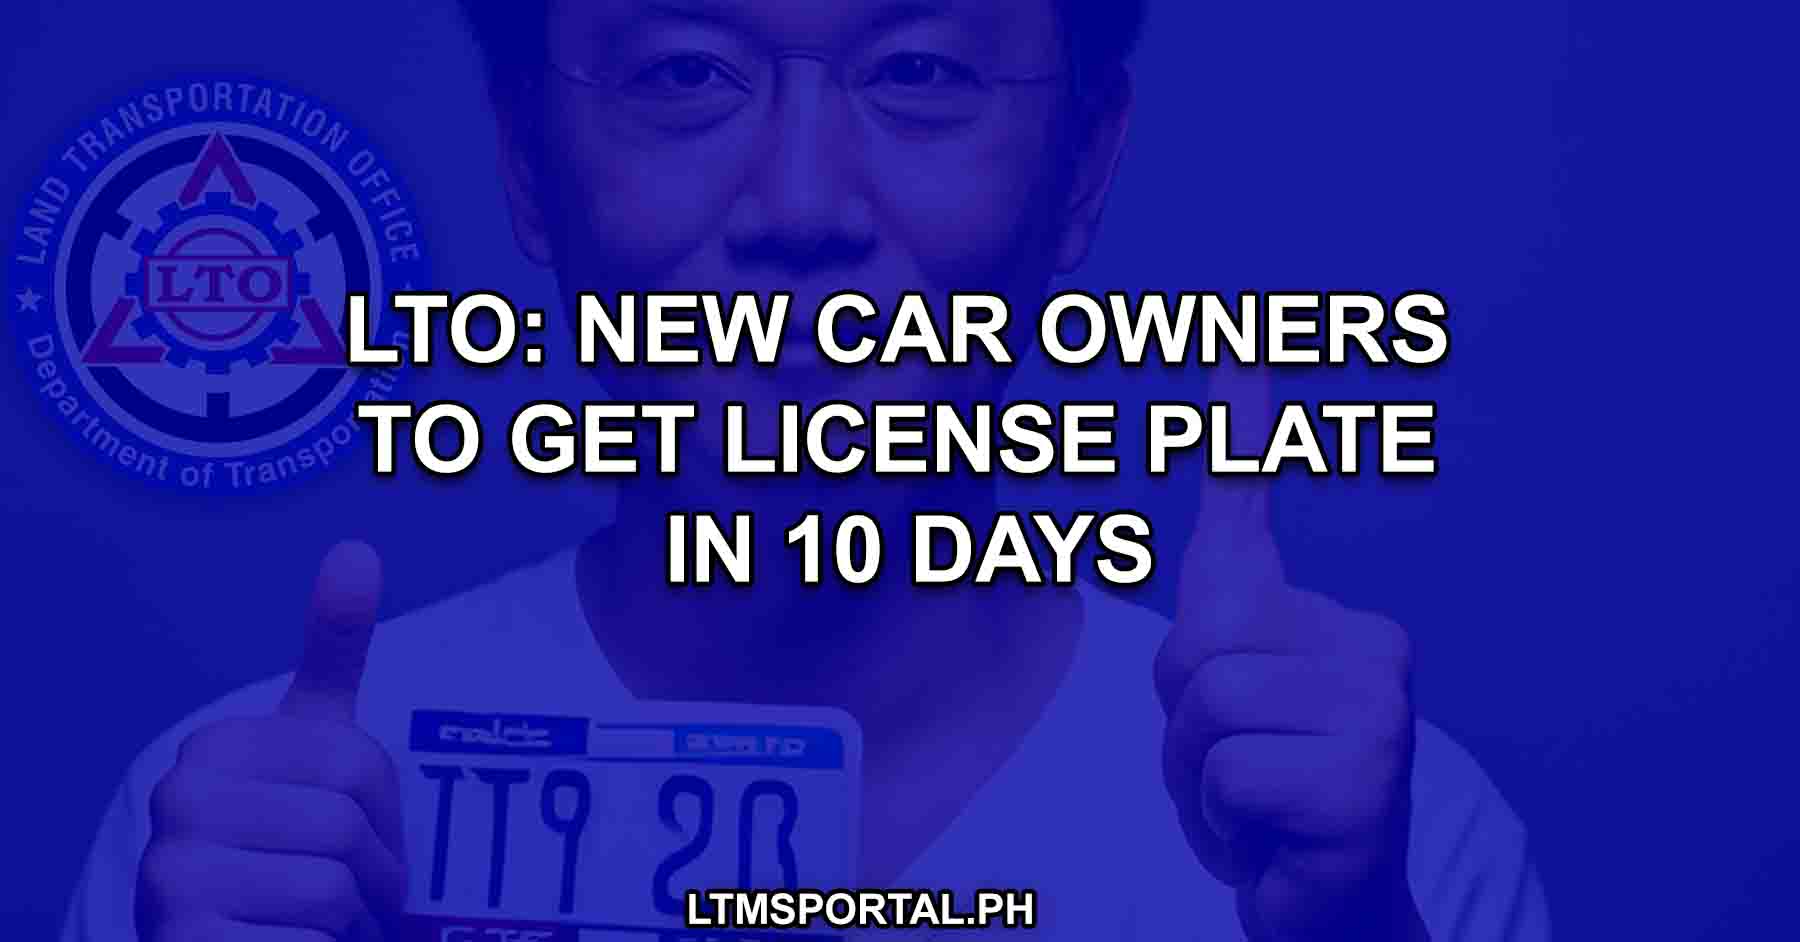 lto says new vehicle owners to receive license plates in 10 days